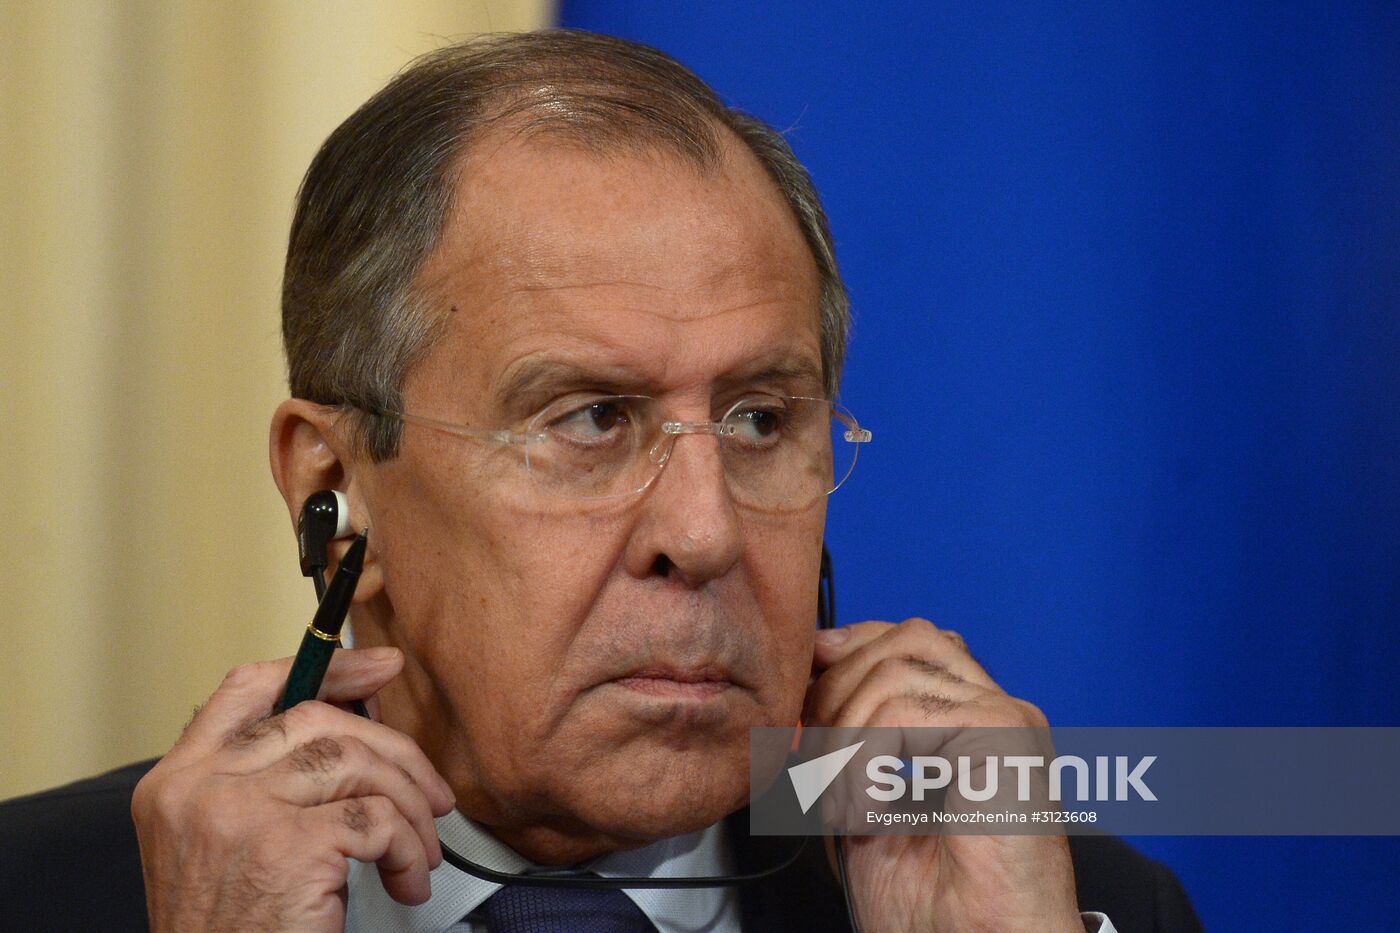 Meeting of Russian and Spanish Foreign Ministers Sergei Lavrov and Alfonso Dastis Quecedo